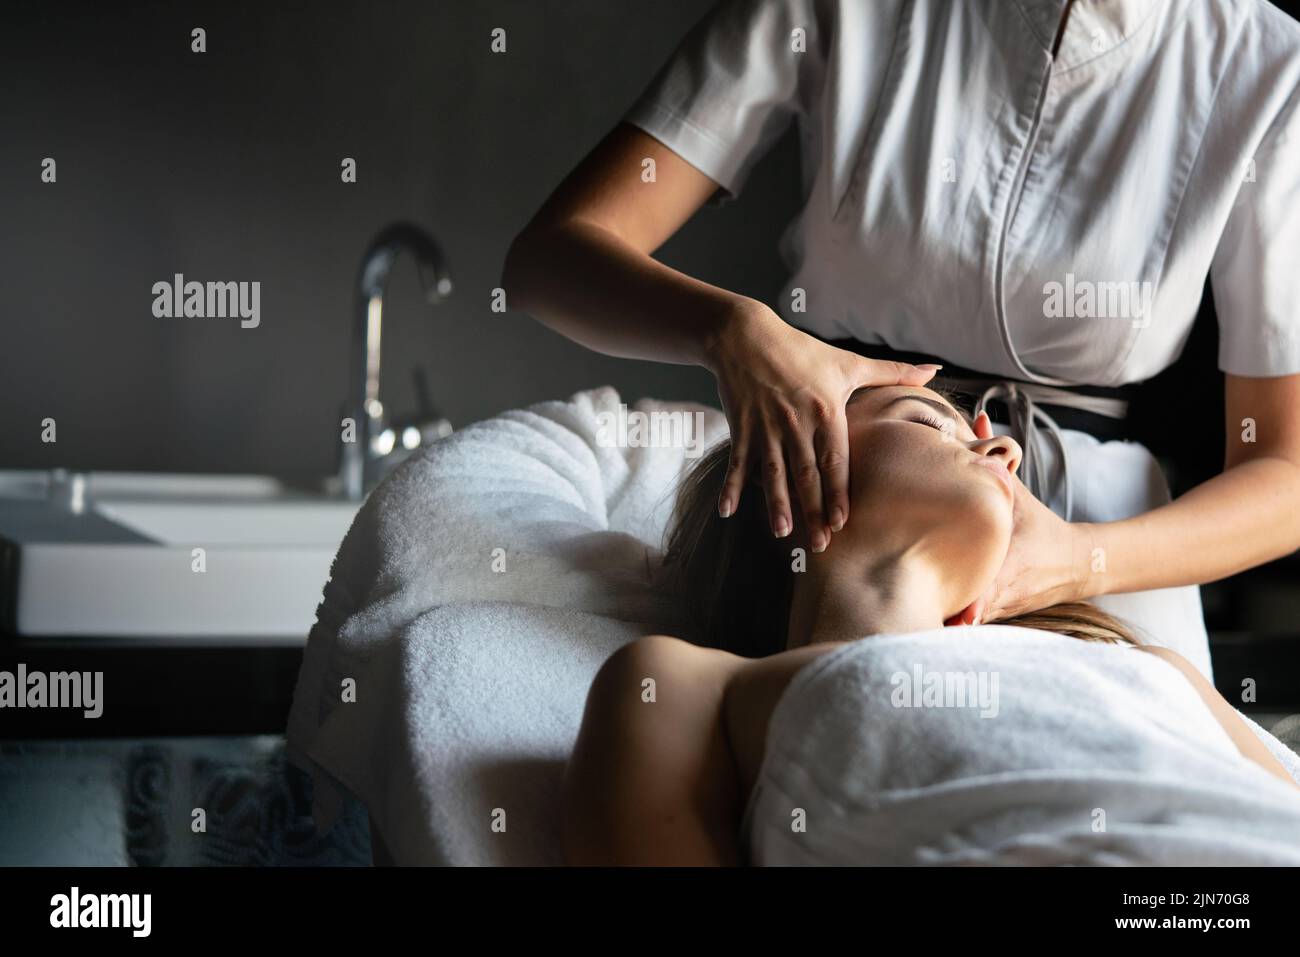 Health, beauty, resort and relaxation concept. Beautiful woman in spa salon getting massage Stock Photo